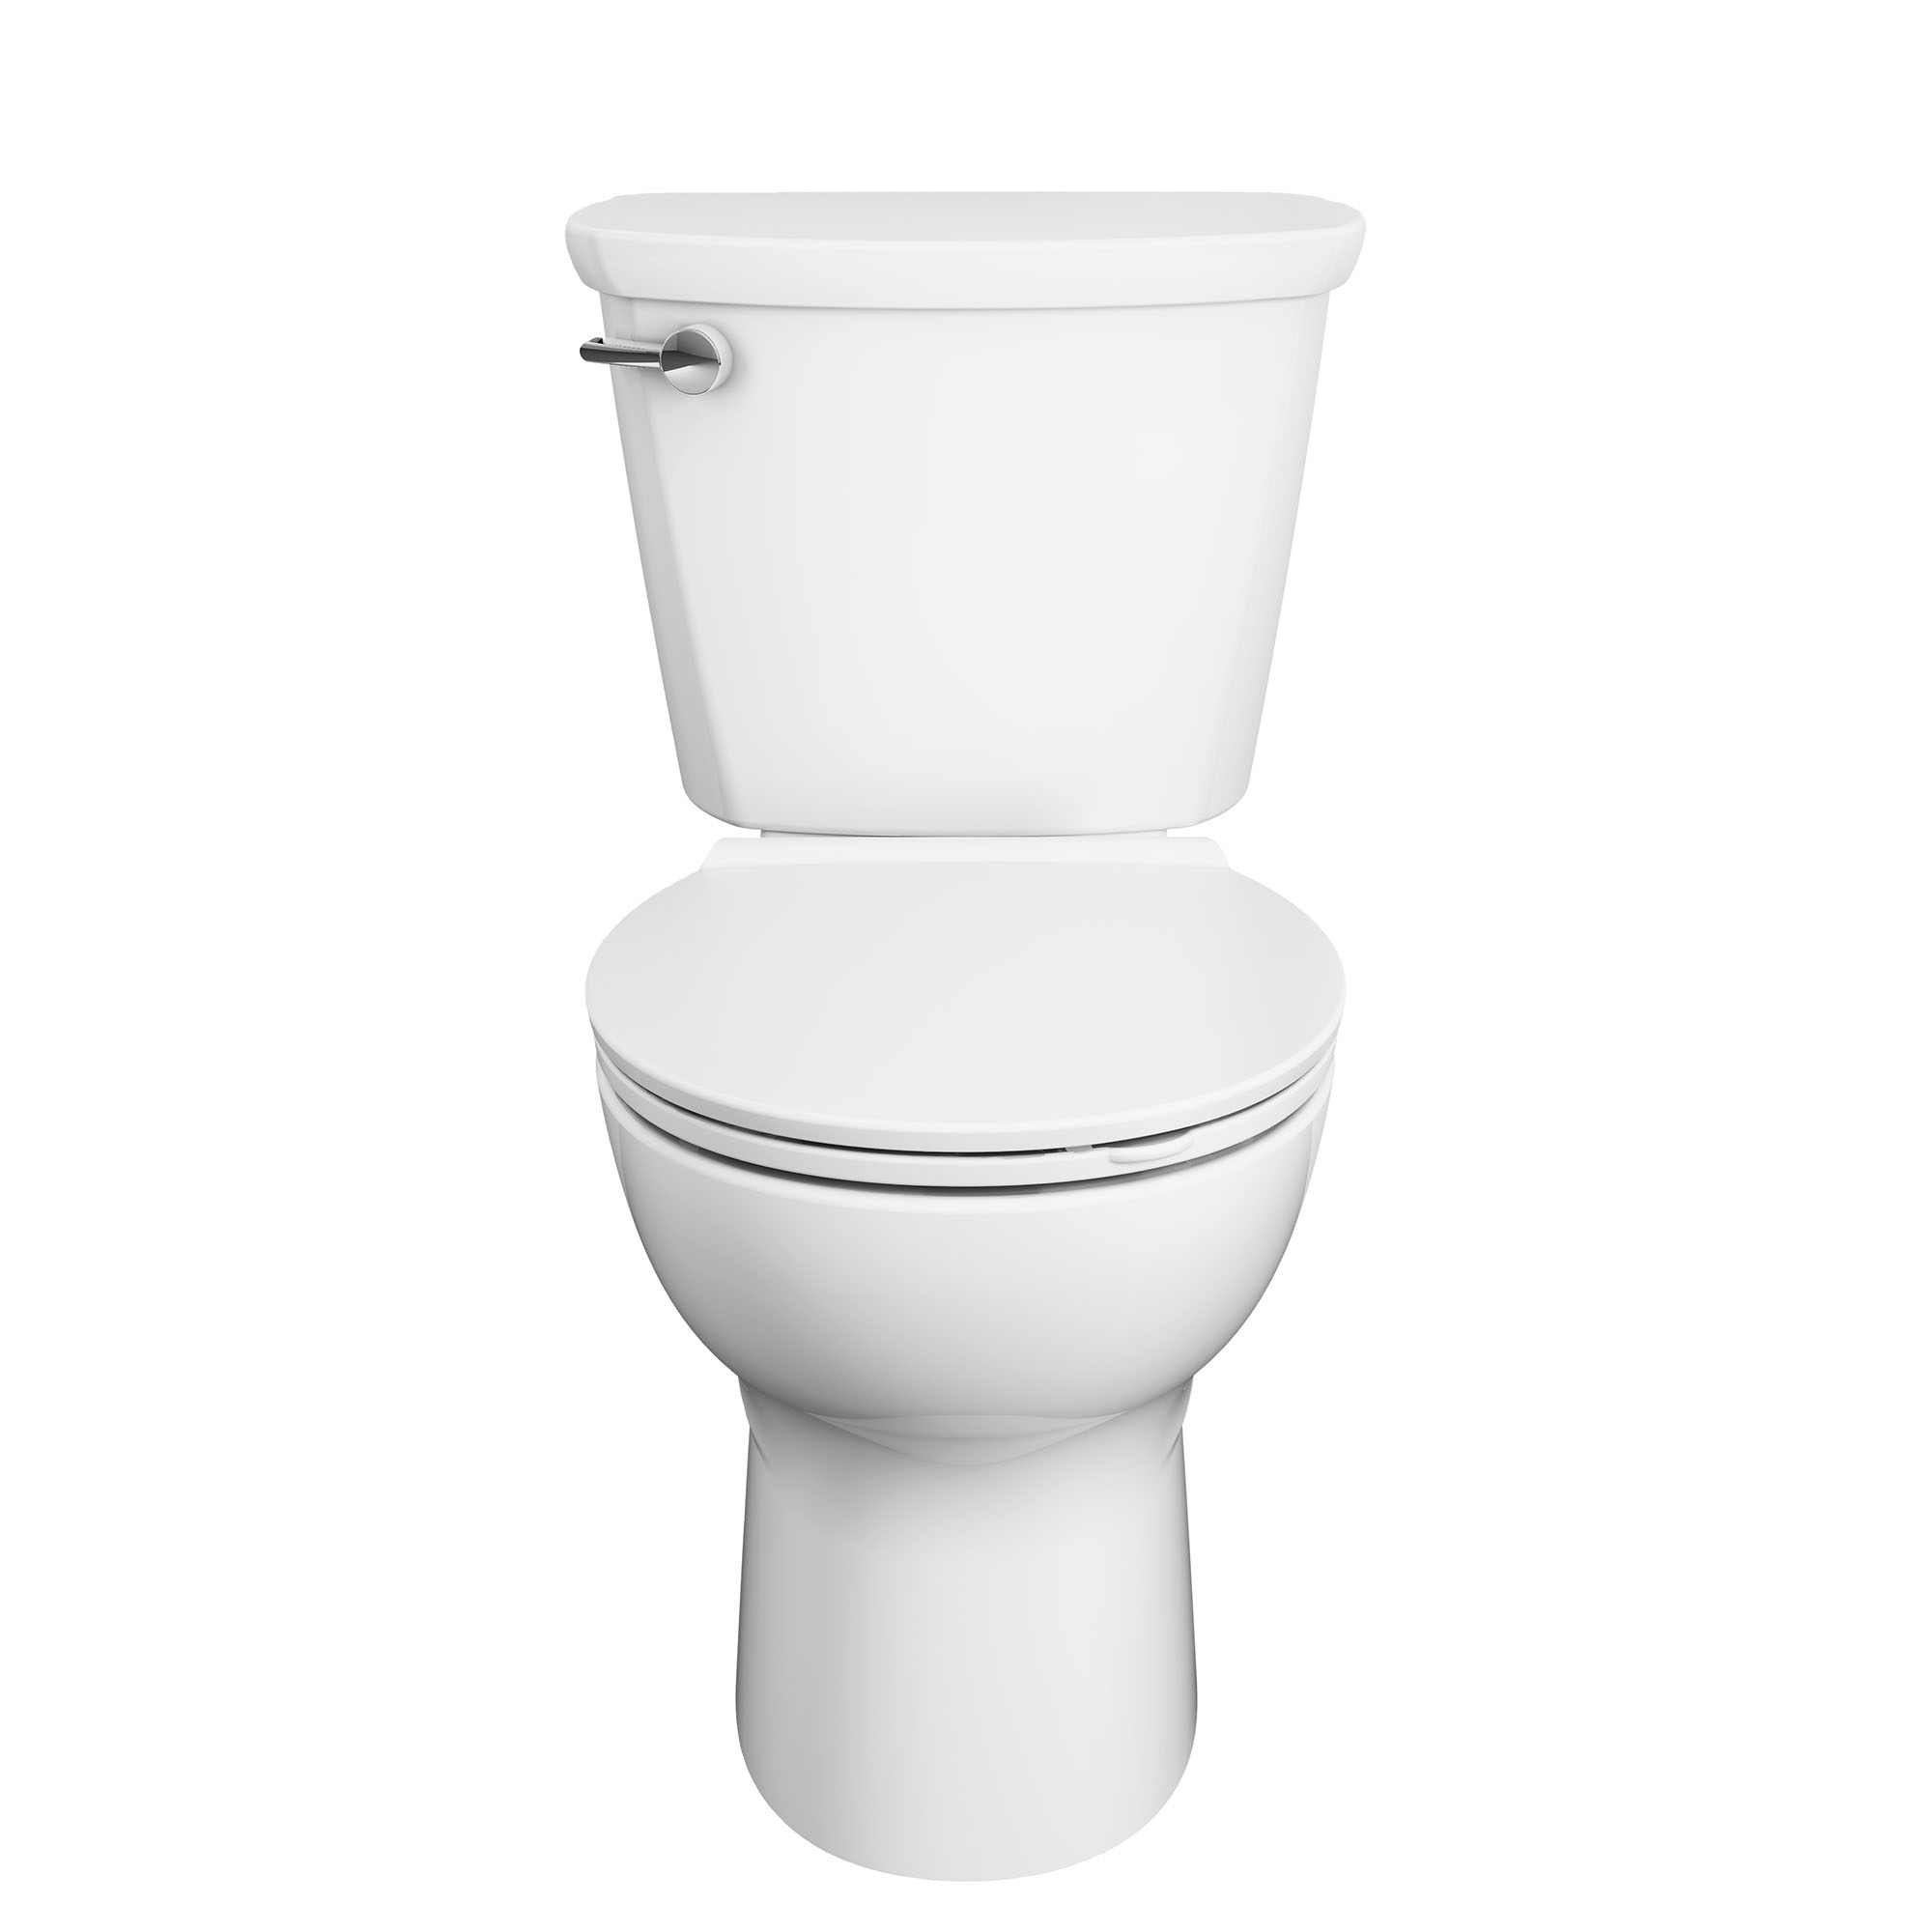 Cadet® PRO Two-Piece 1.28 gpf/4.8 Lpf Standard Height Round Front Toilet Less Seat